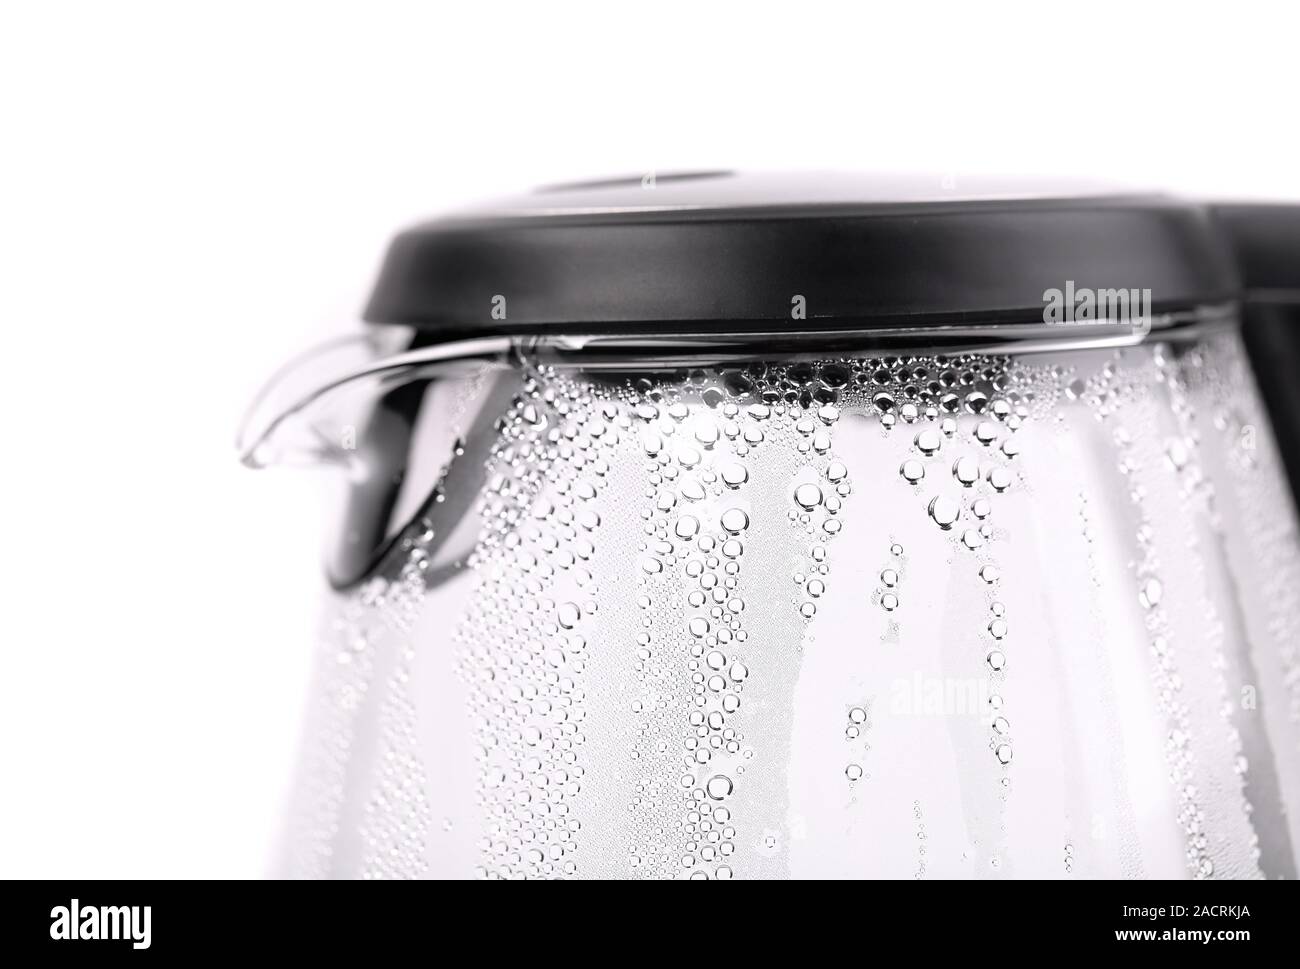 https://c8.alamy.com/comp/2ACRKJA/water-boiling-in-the-glass-electric-kettle-2ACRKJA.jpg